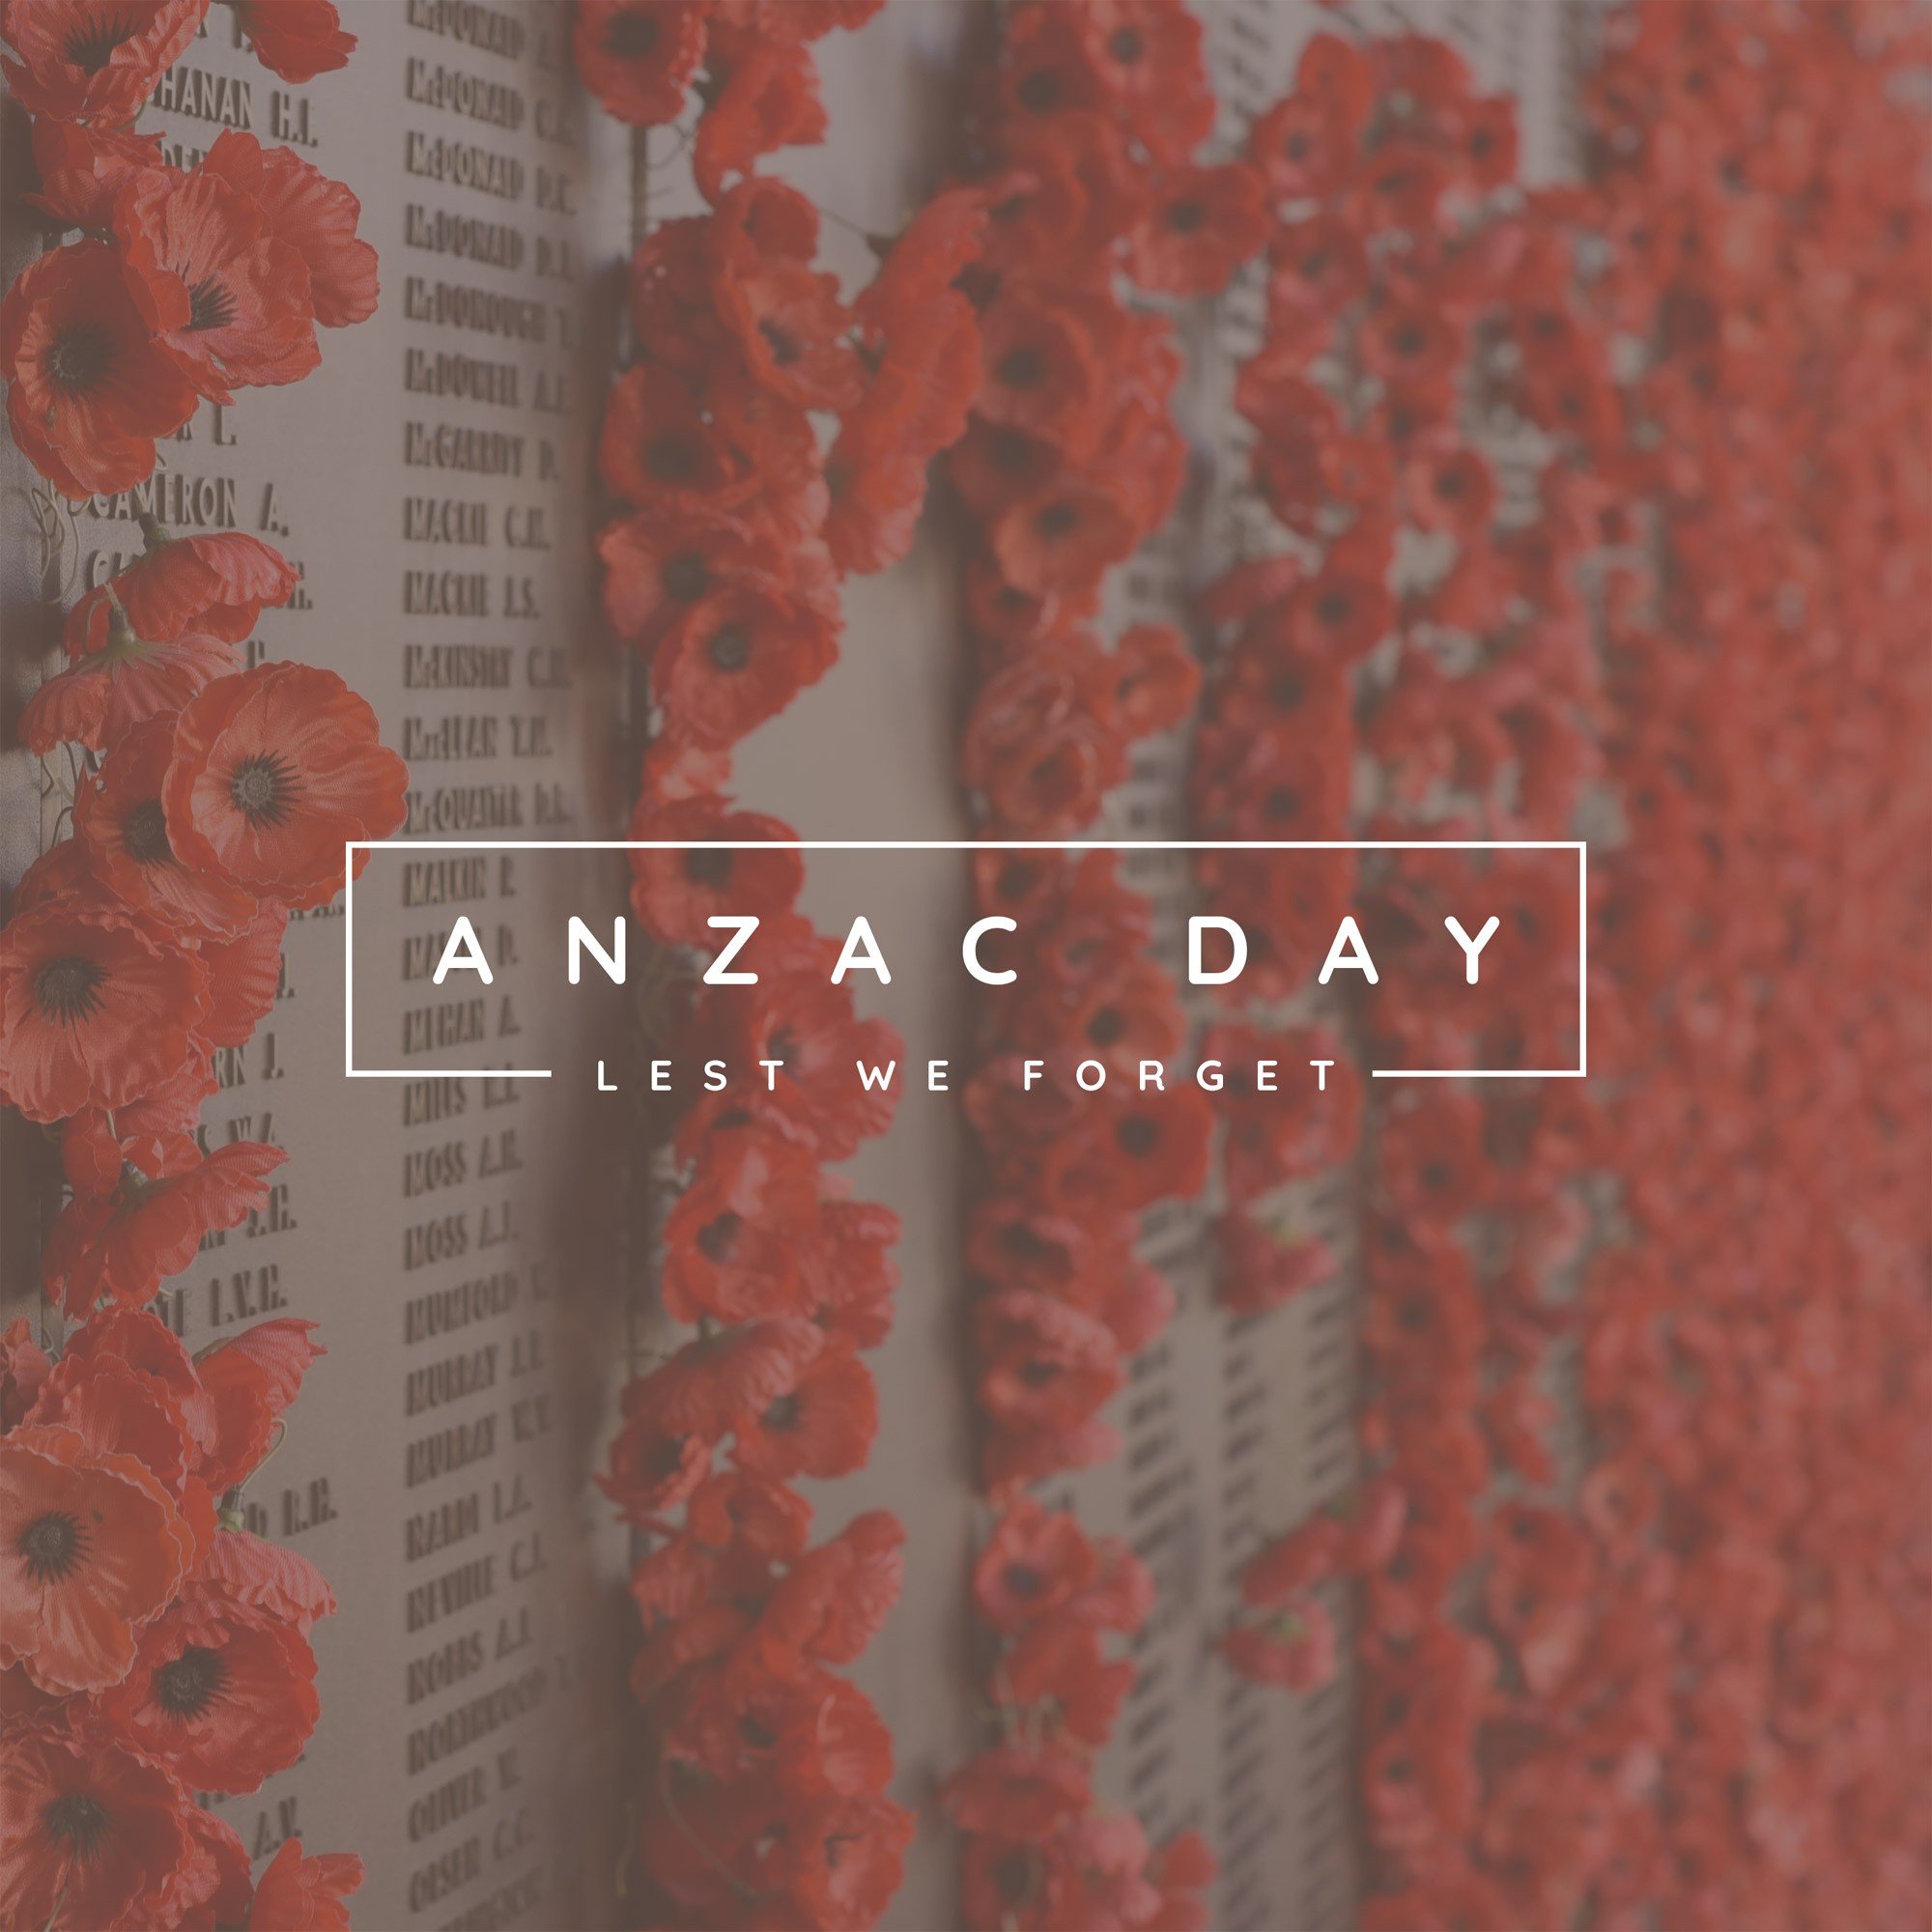 They shall grow not old, as we that are left grow old: Age shall not weary them, nor the years condemn.